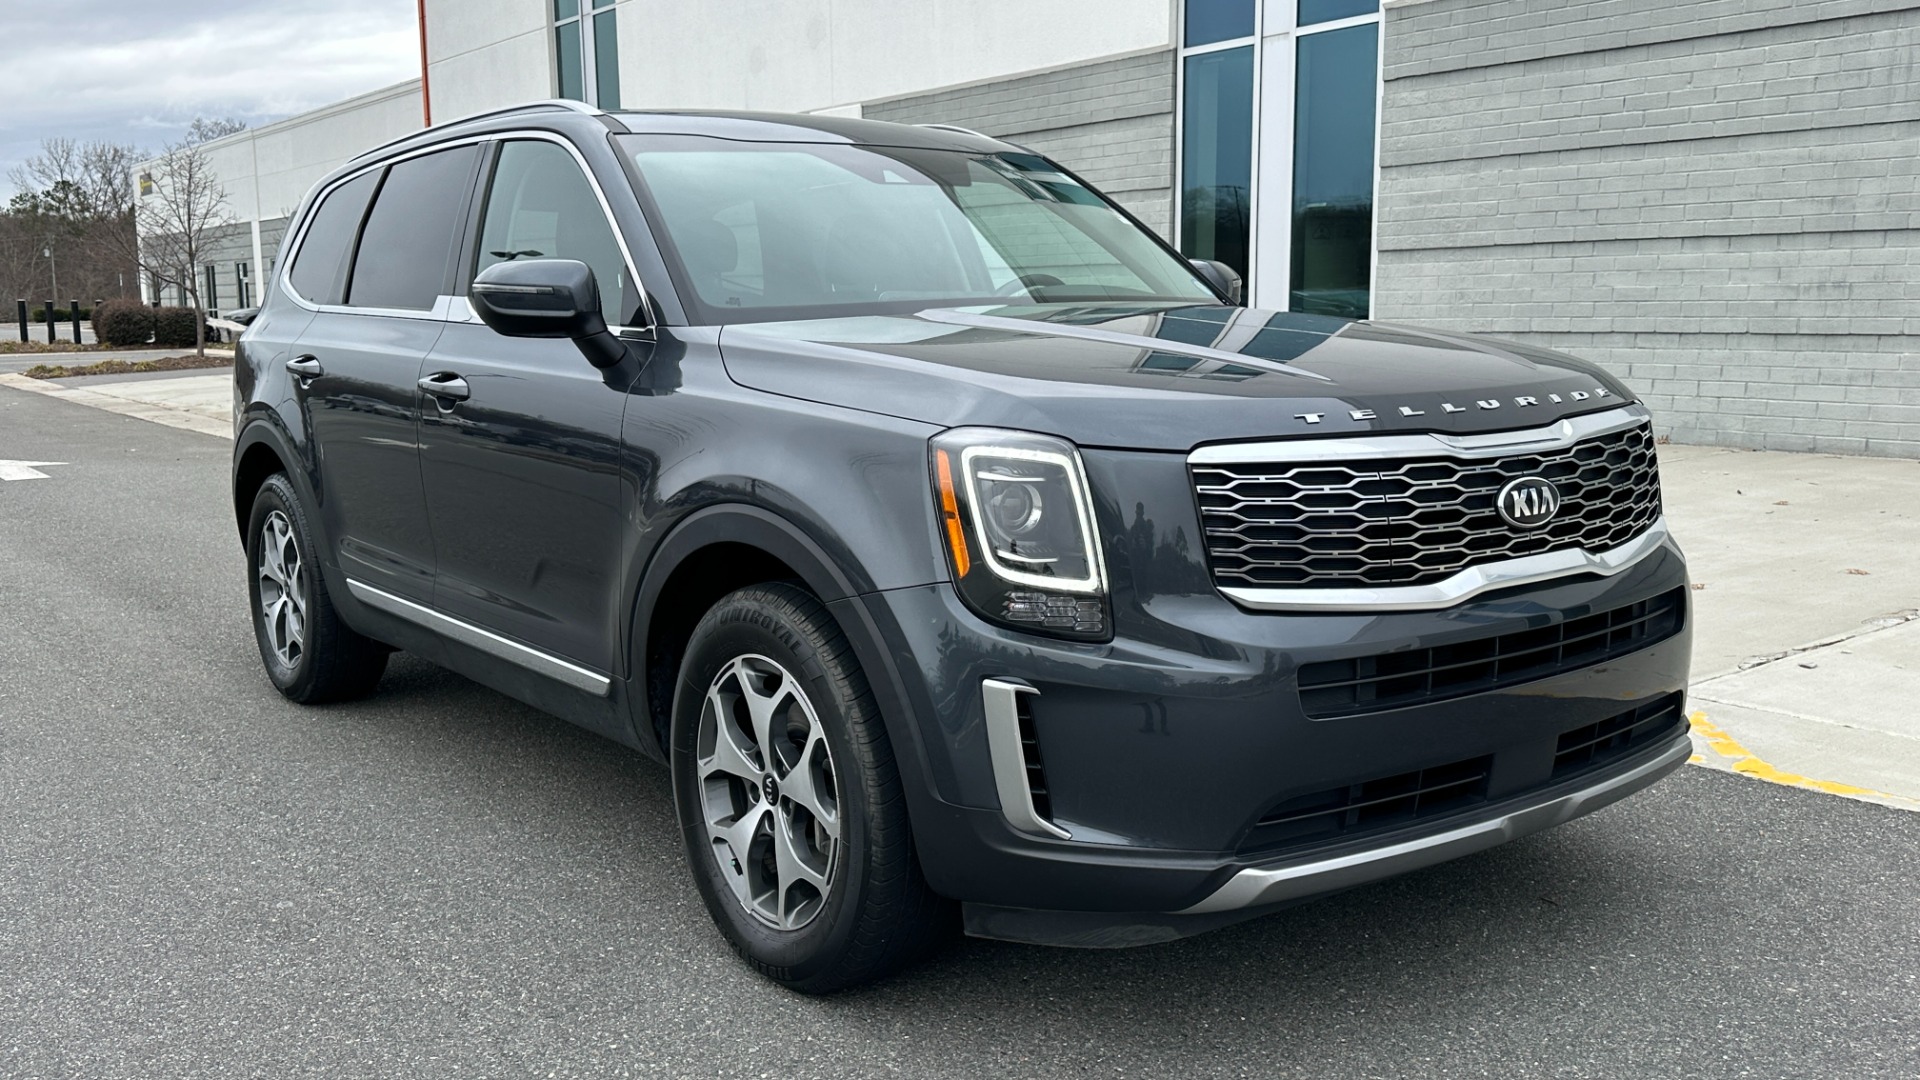 Used 2020 Kia Telluride EX / DRIVER ASSIST / LEATHER / V6 / APPLE CARPLAY / REARVIEW / 3 ROW for sale Sold at Formula Imports in Charlotte NC 28227 5